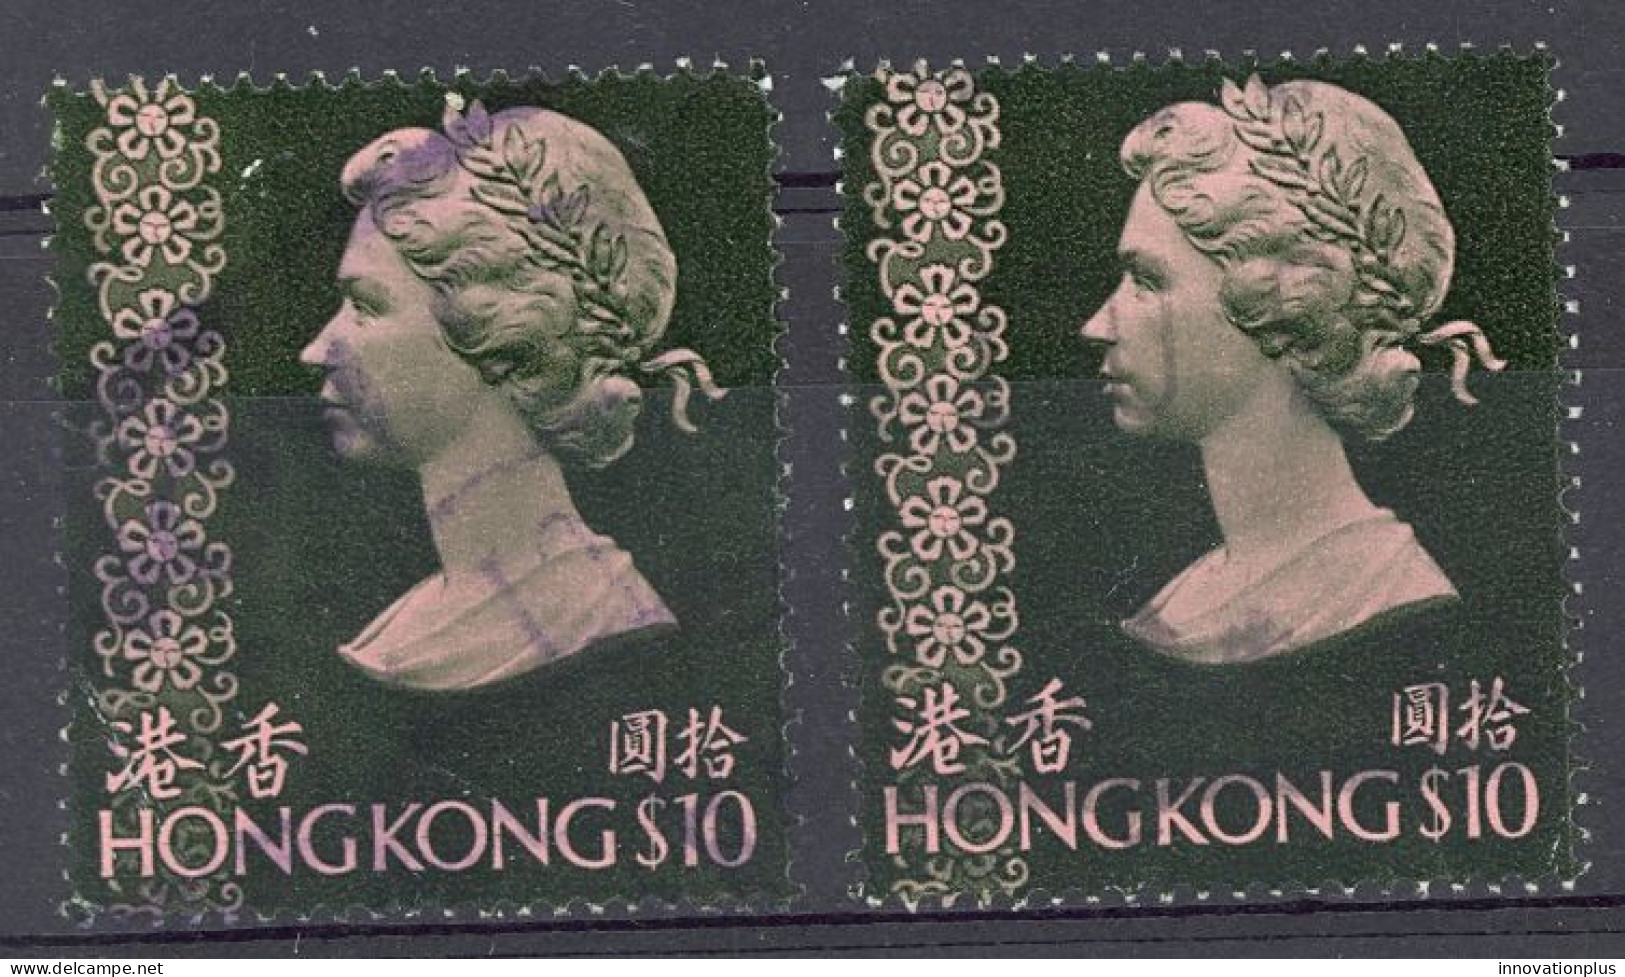 Hong Kong Sc# 287-287a Used 1973-1978 $10 QEII (both Watermarks) - Used Stamps